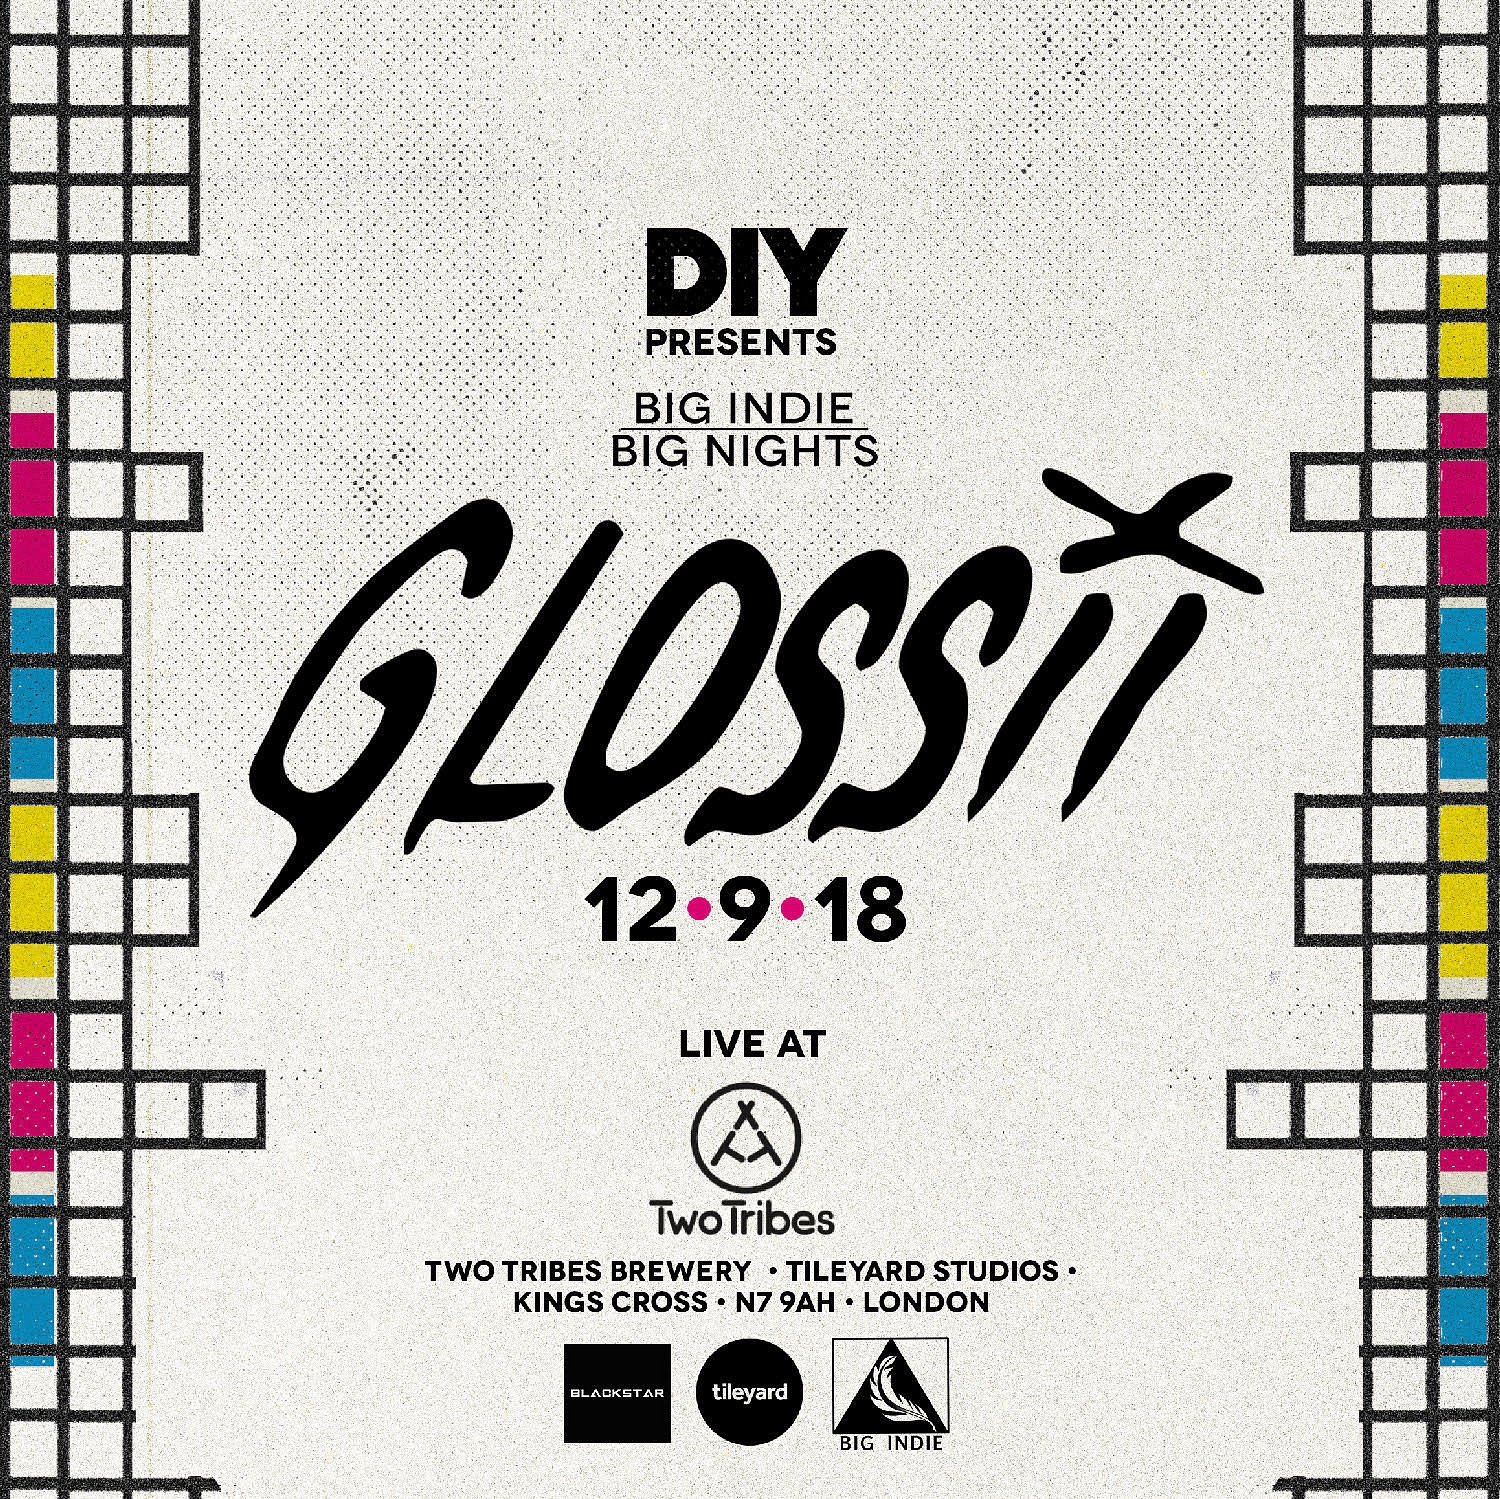 Glossii to play next edition of Big Indie Big Nights